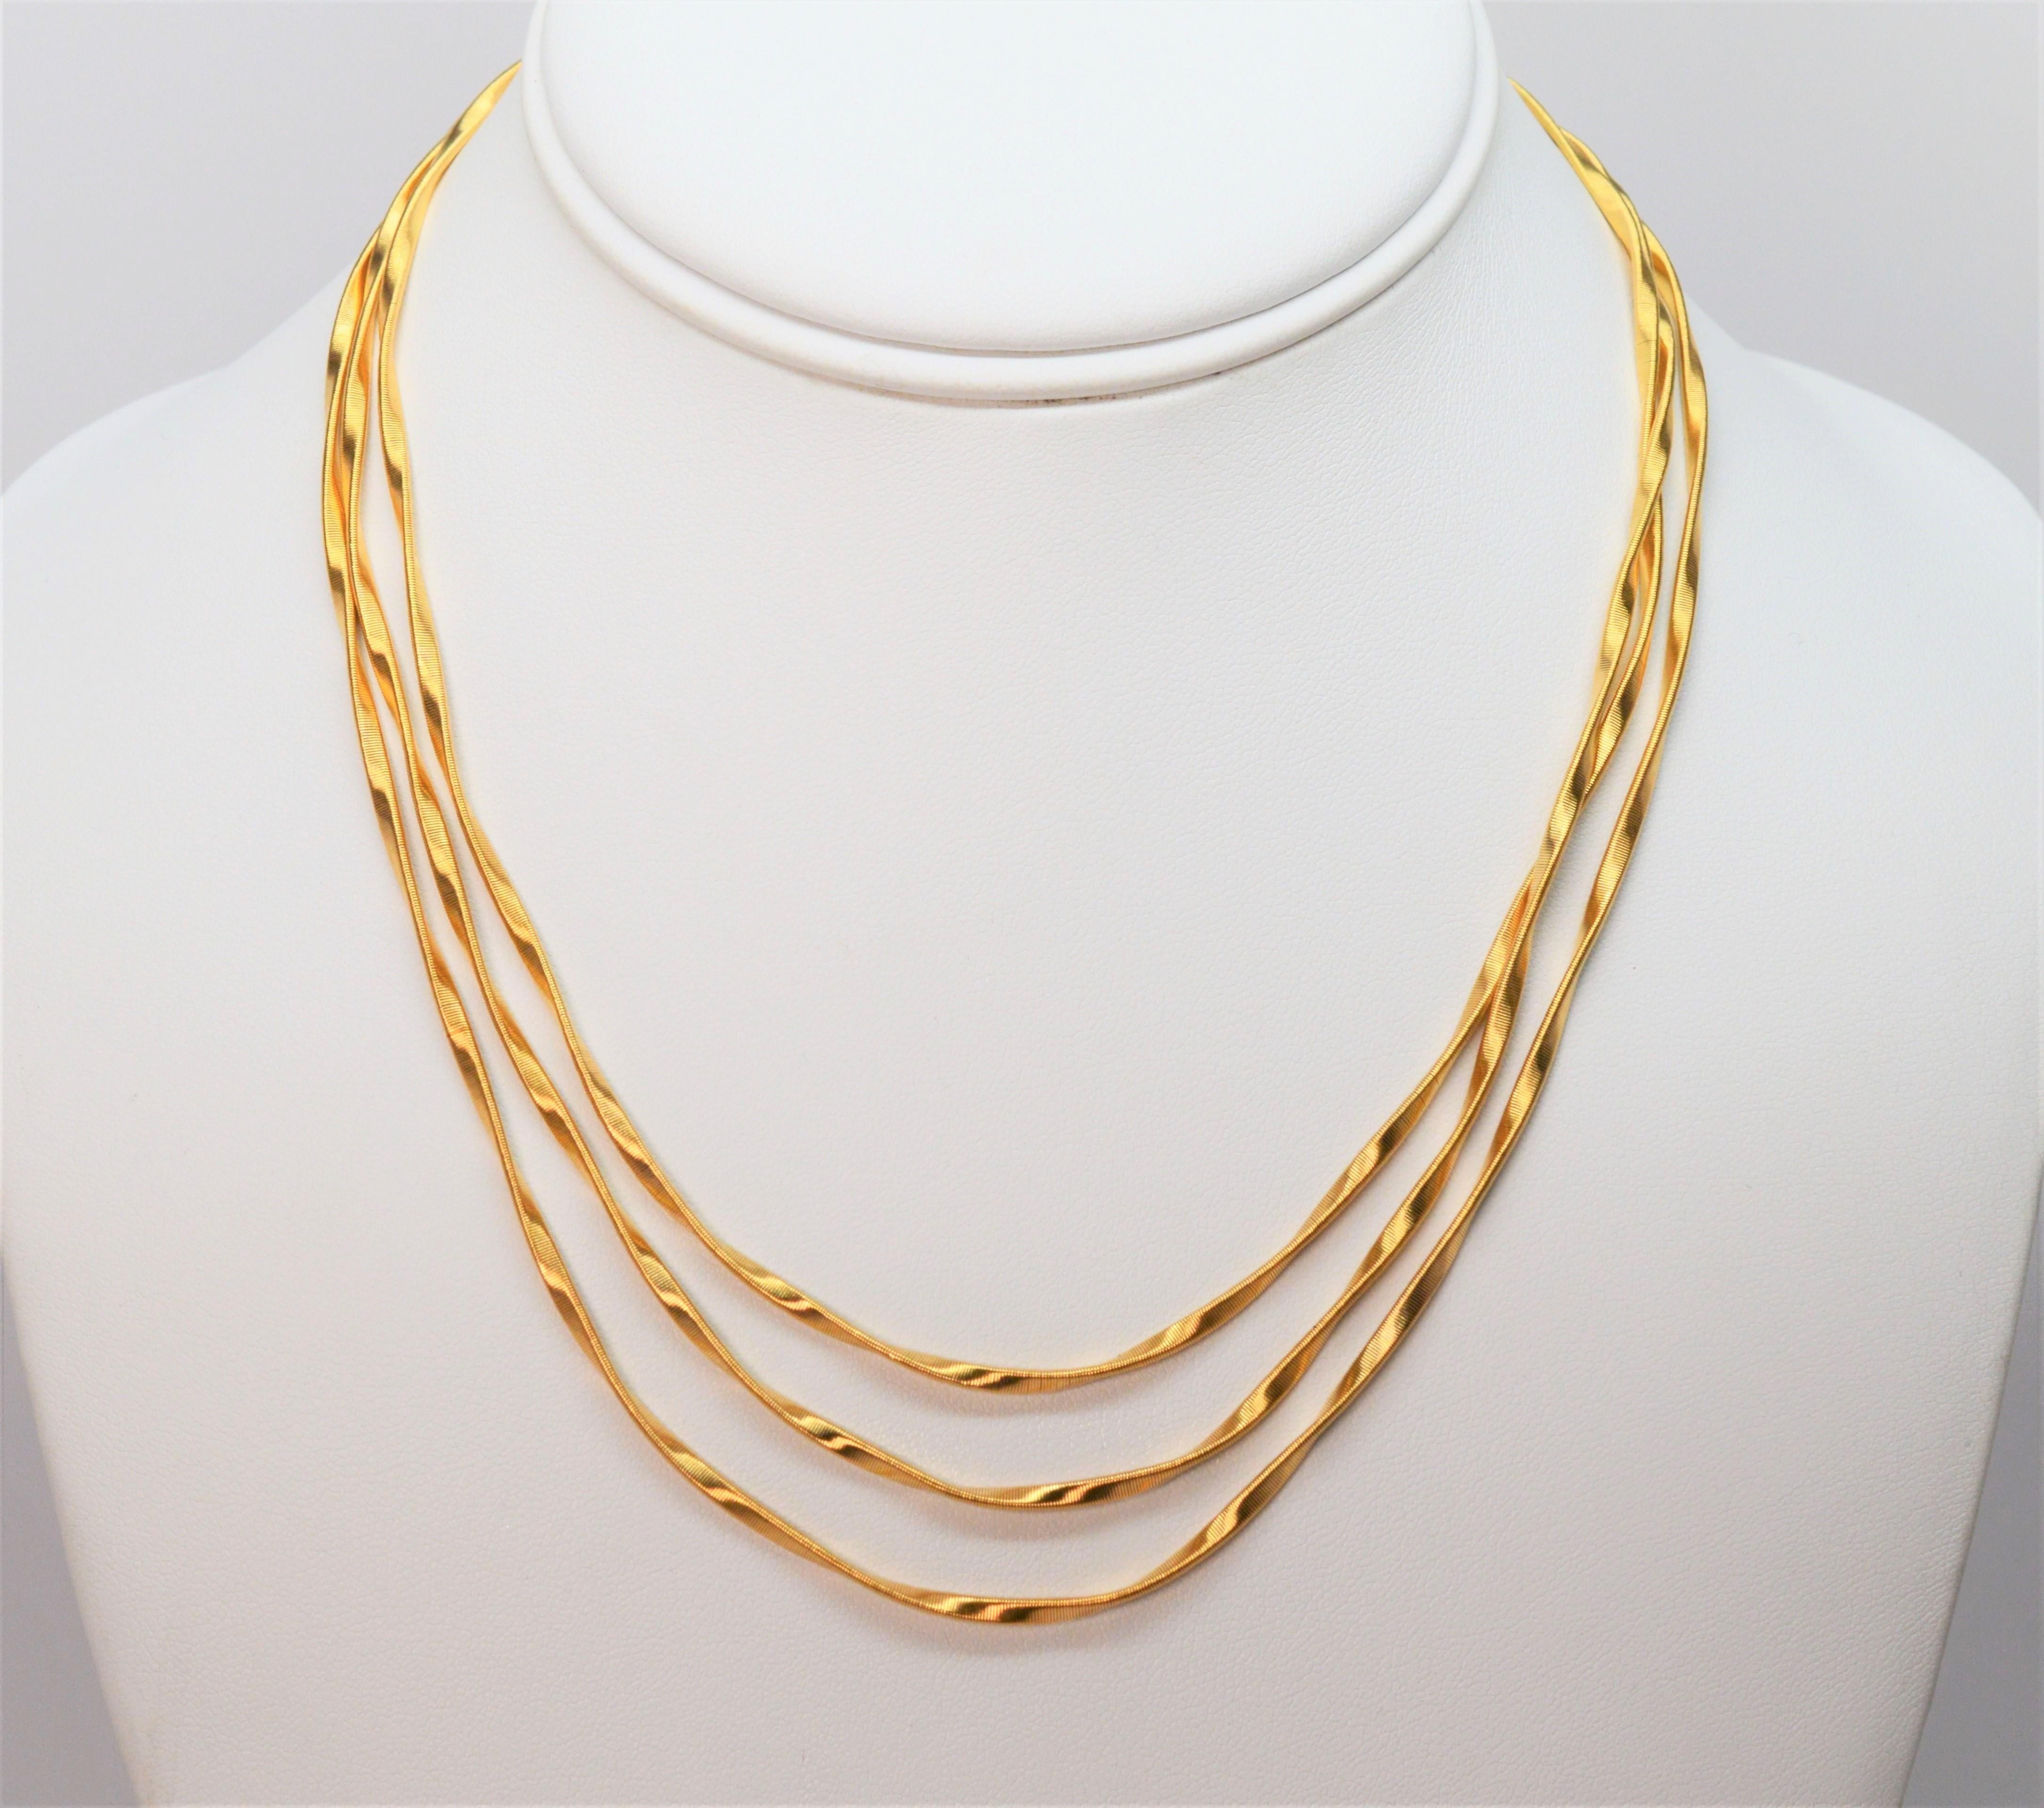 The mastery of artisanal techniques shine in the hand hammered and hand twisted strands of eighteen karat 18K yellow gold that create this contemporary multi strand collar necklace by Italian designer Marco Bicego. From the Marrakech Collection,